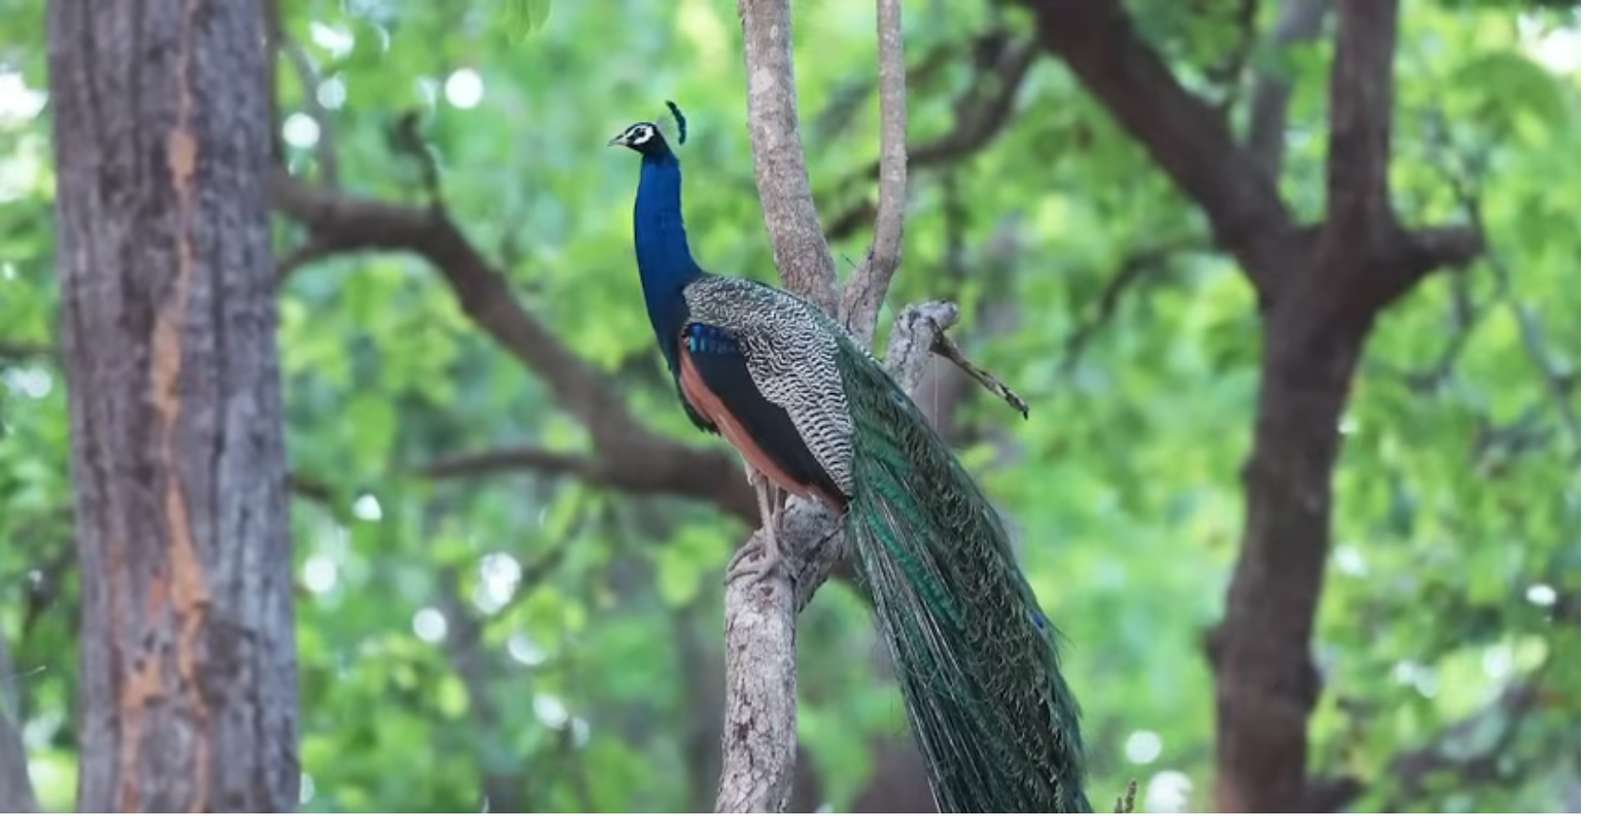 Peacock In The Tree puzzle online from photo